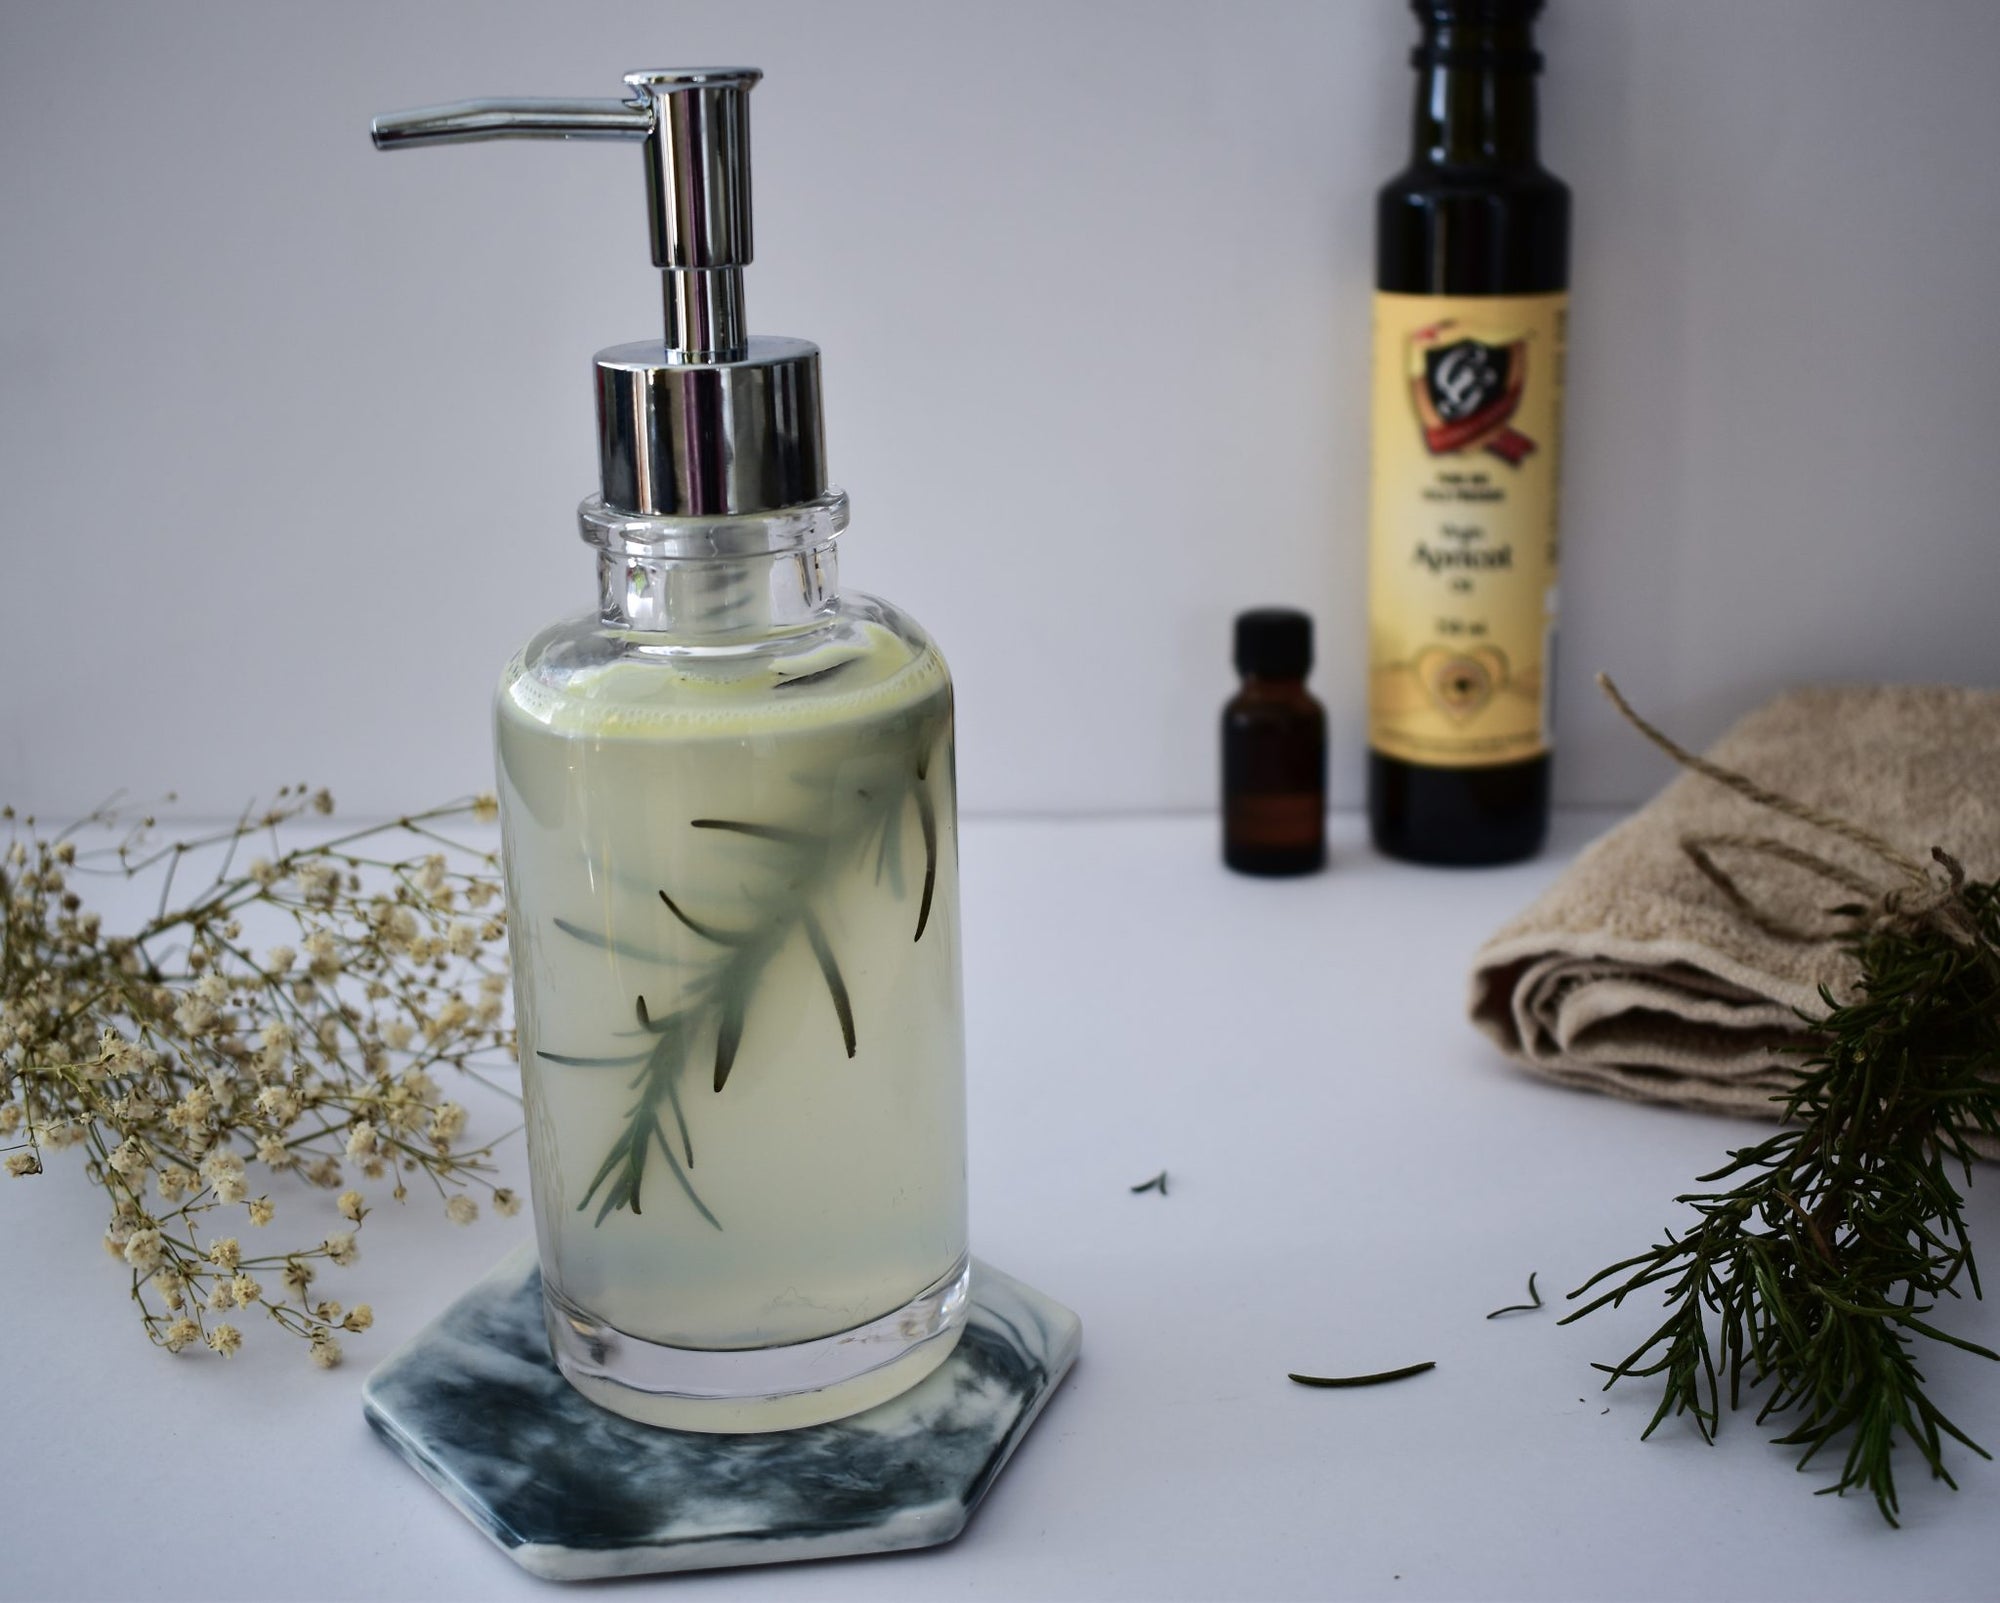 Cleansing lavender and rosemary foaming handwash